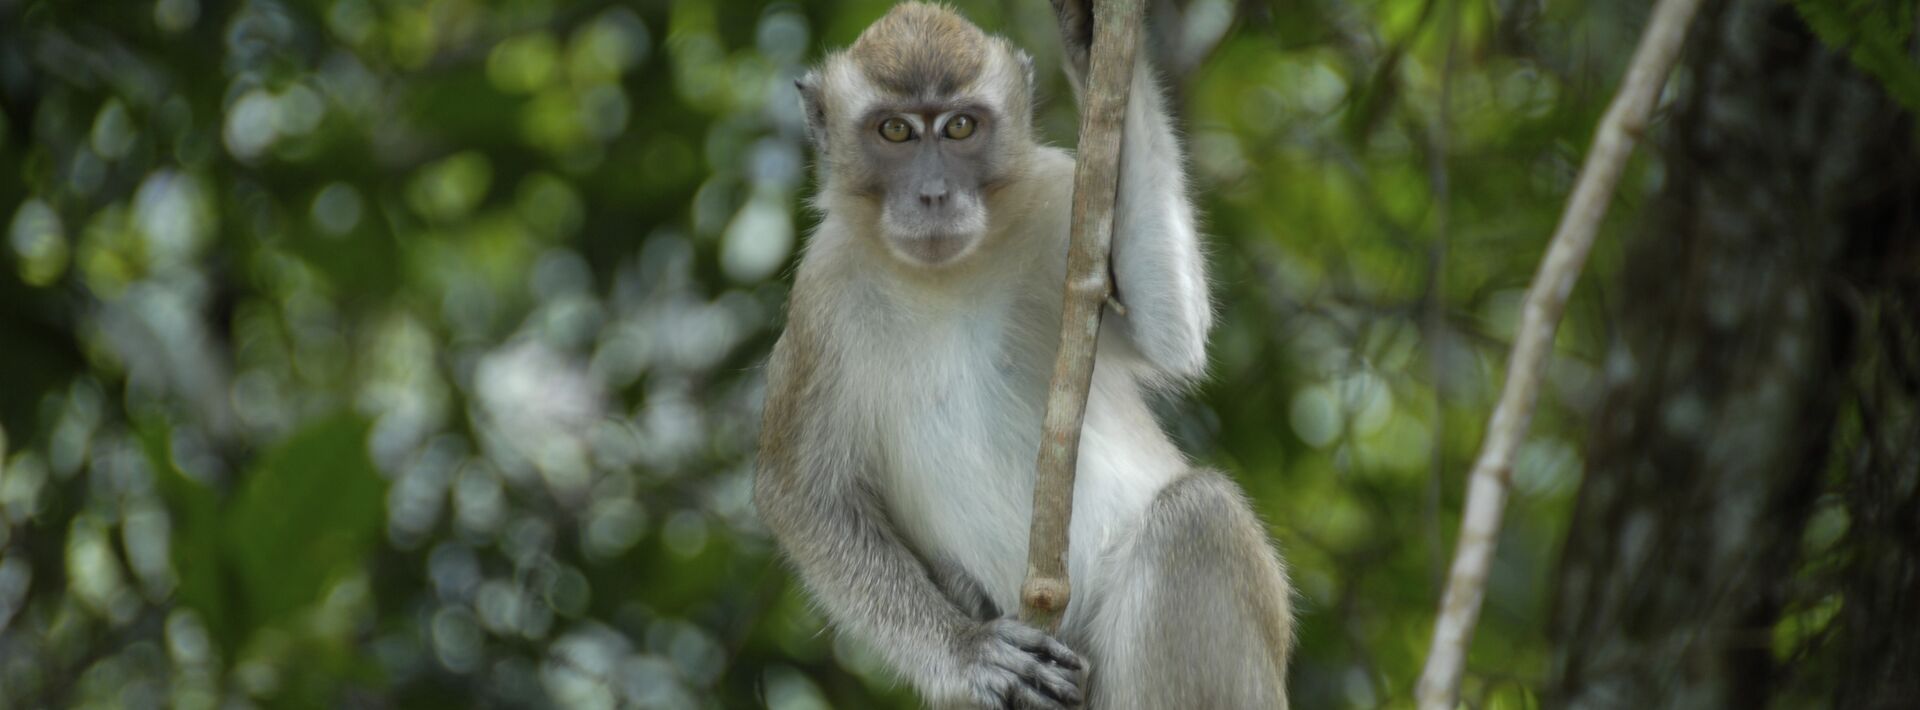 Long-tailed macaque surrounded by trees